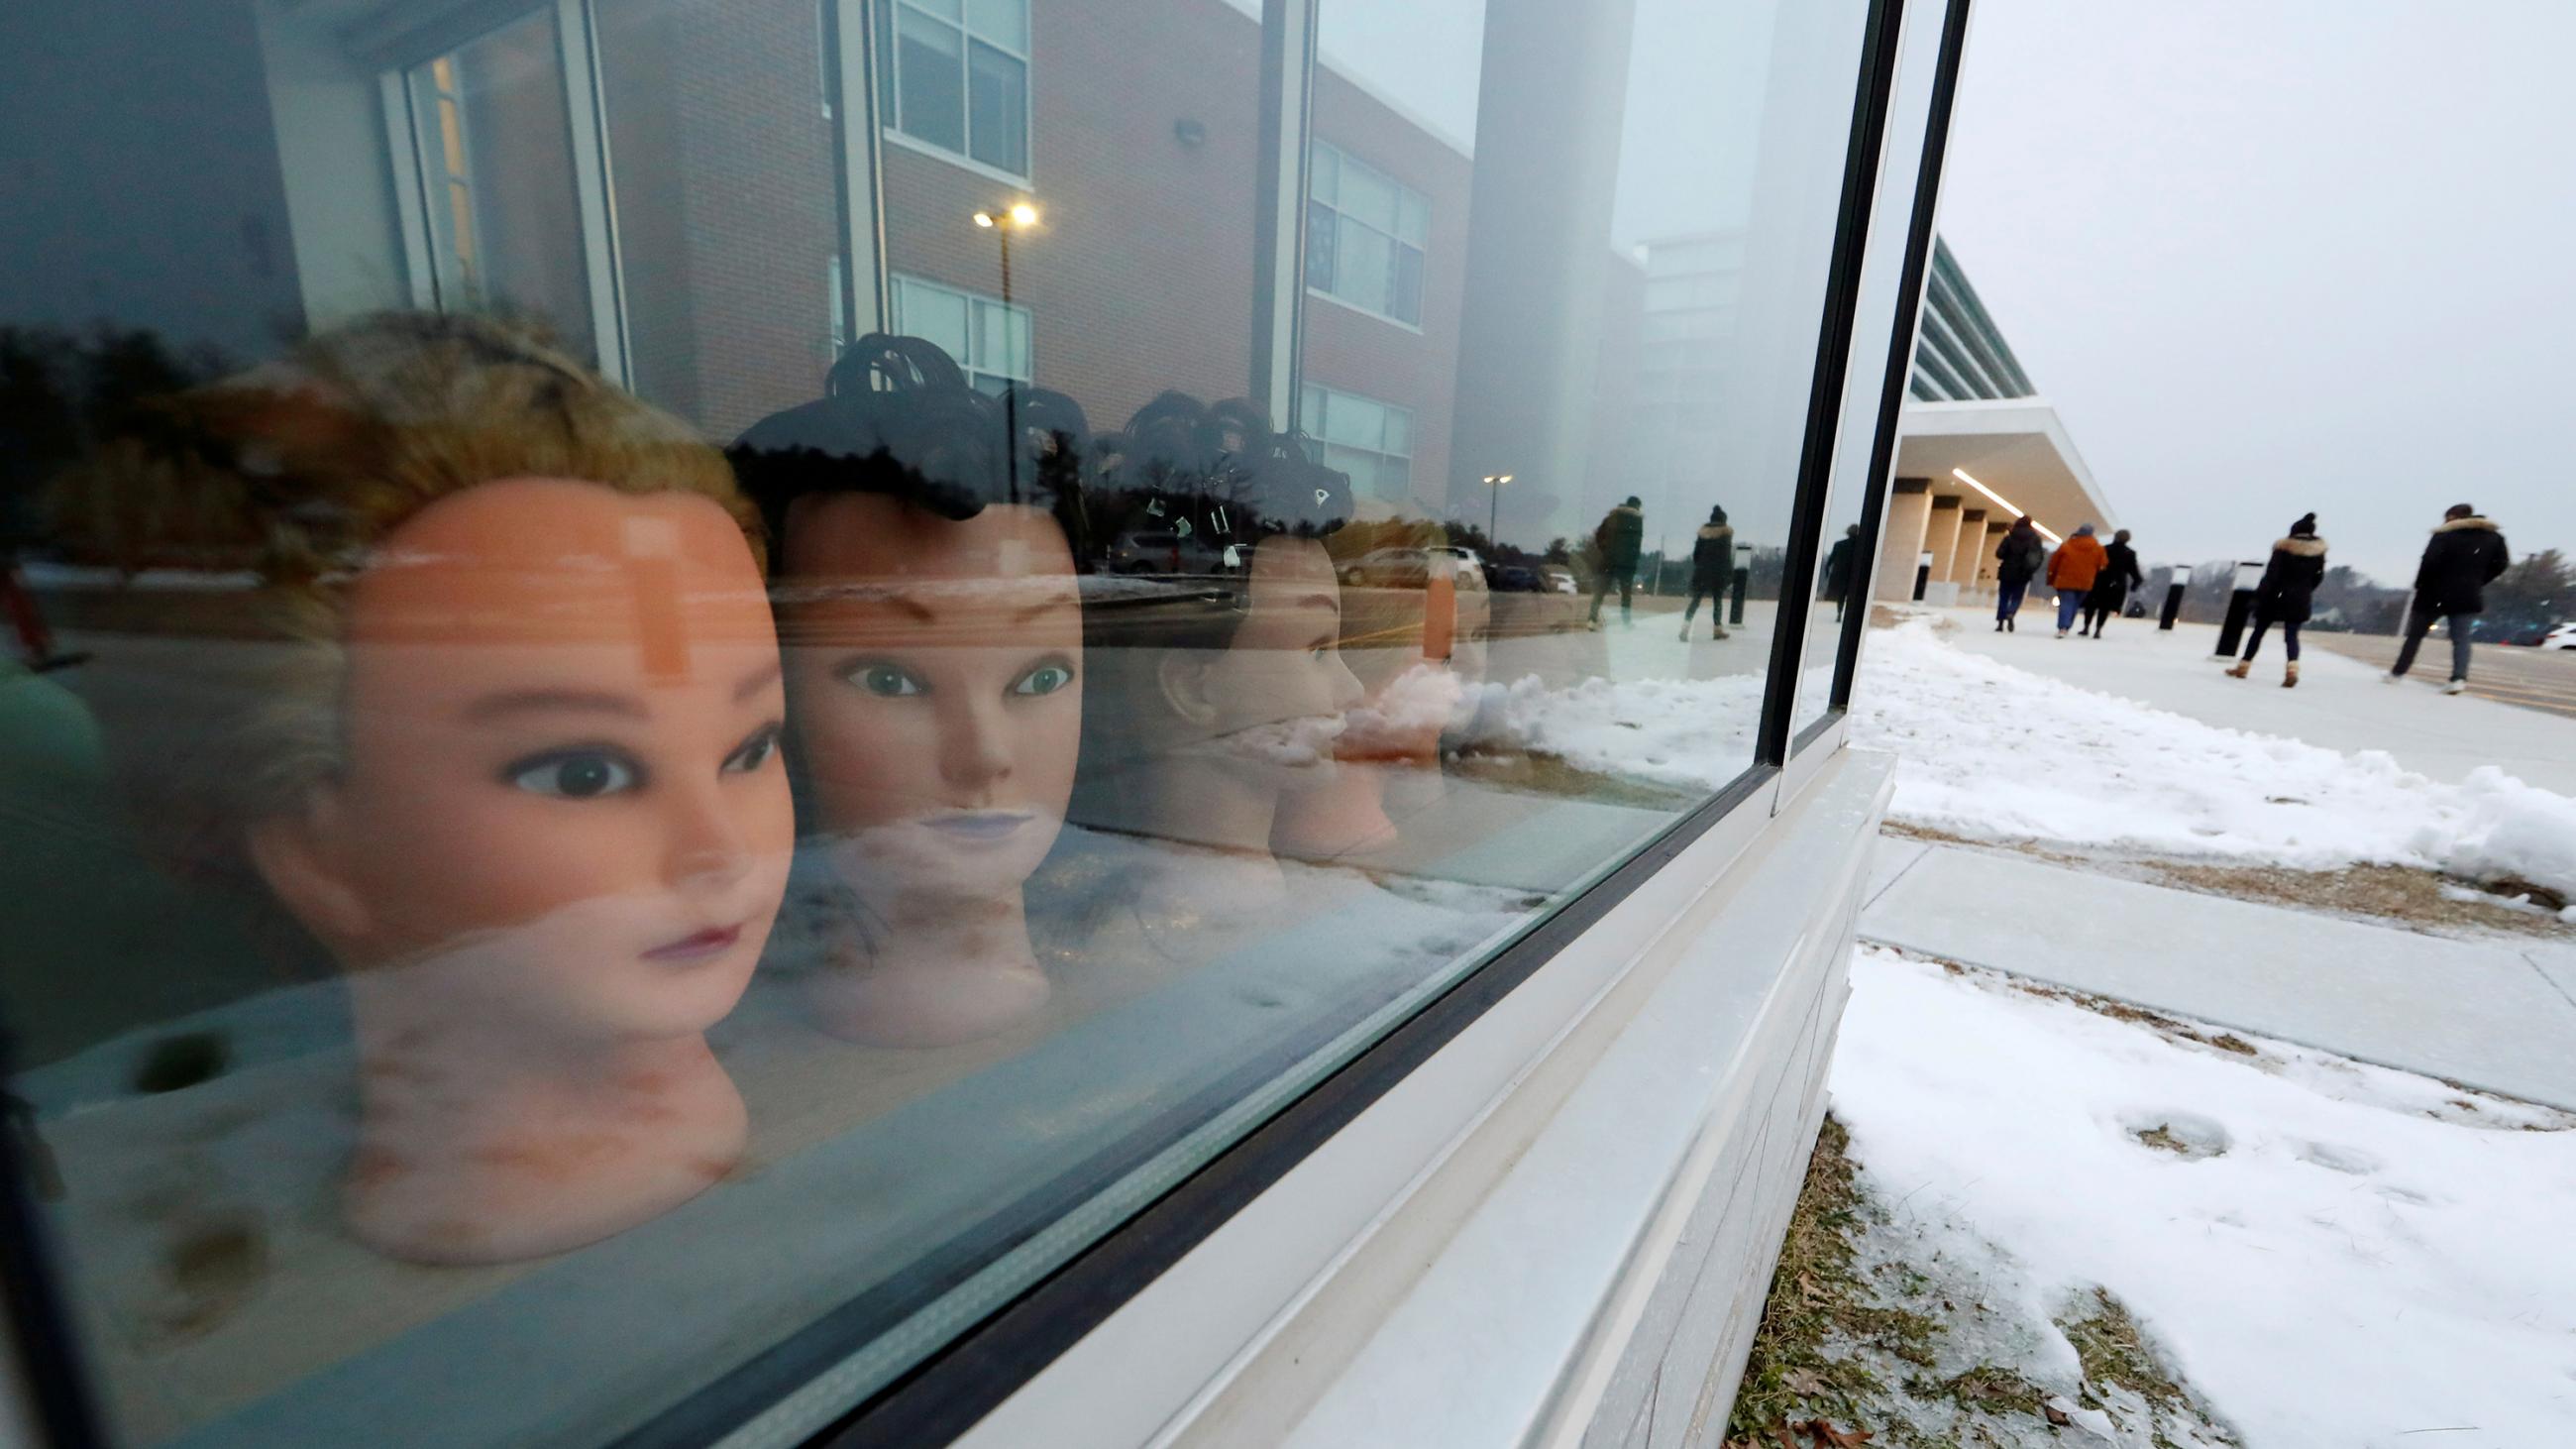 The photo shows a bunch of mannequin heads lined up as if they are looking out a window onto a winter scene with kids playing in a snow-covered field. 